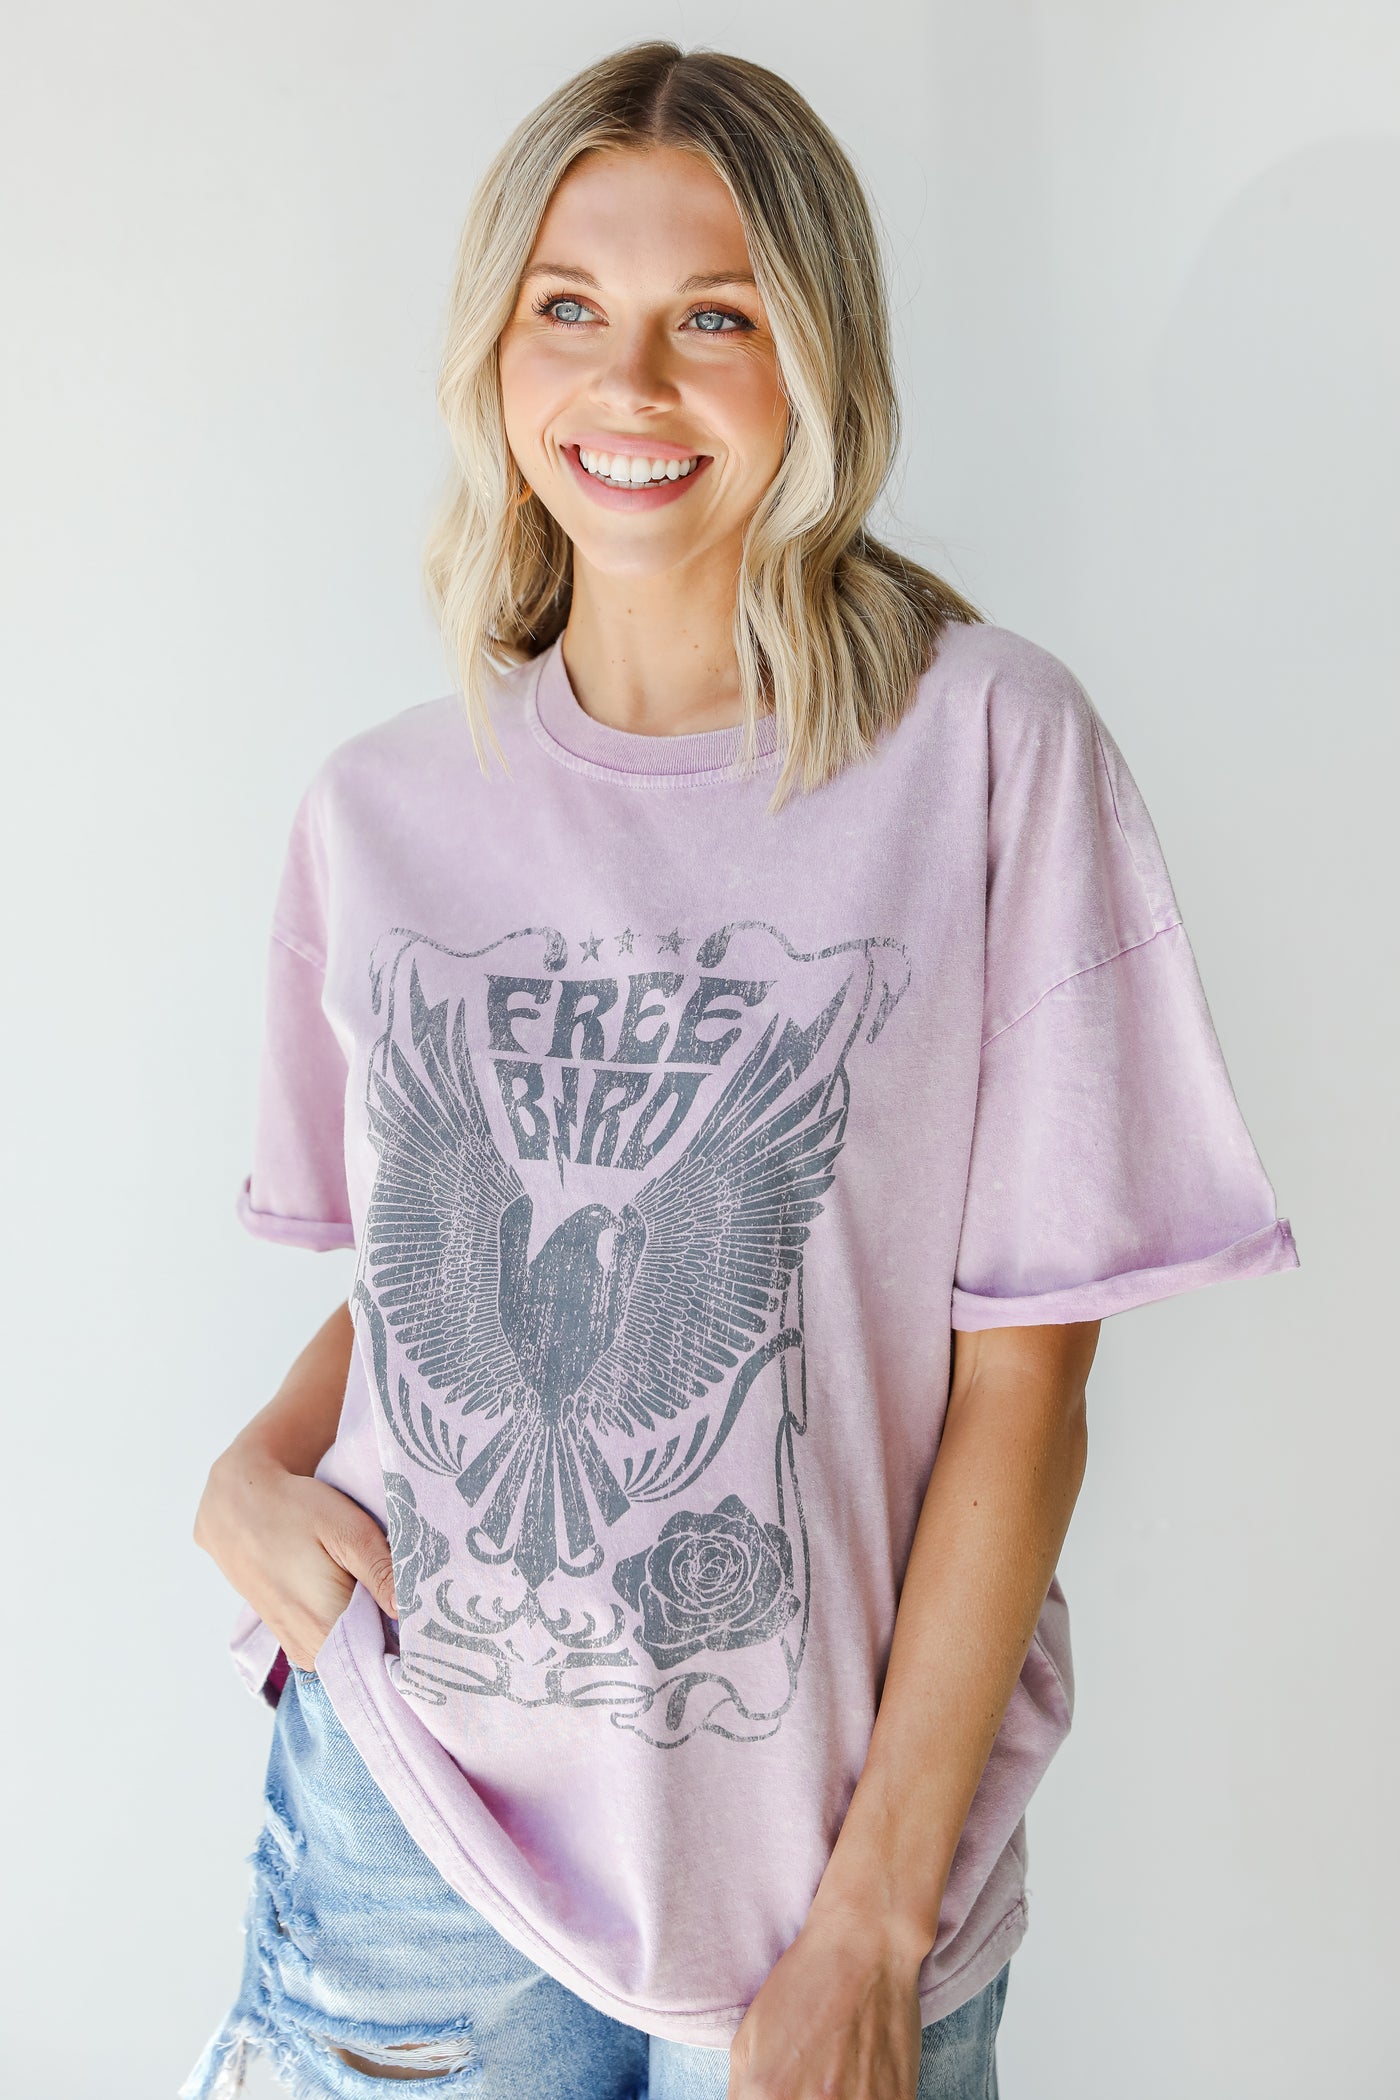 Free Bird Acid Washed Tee in lavender